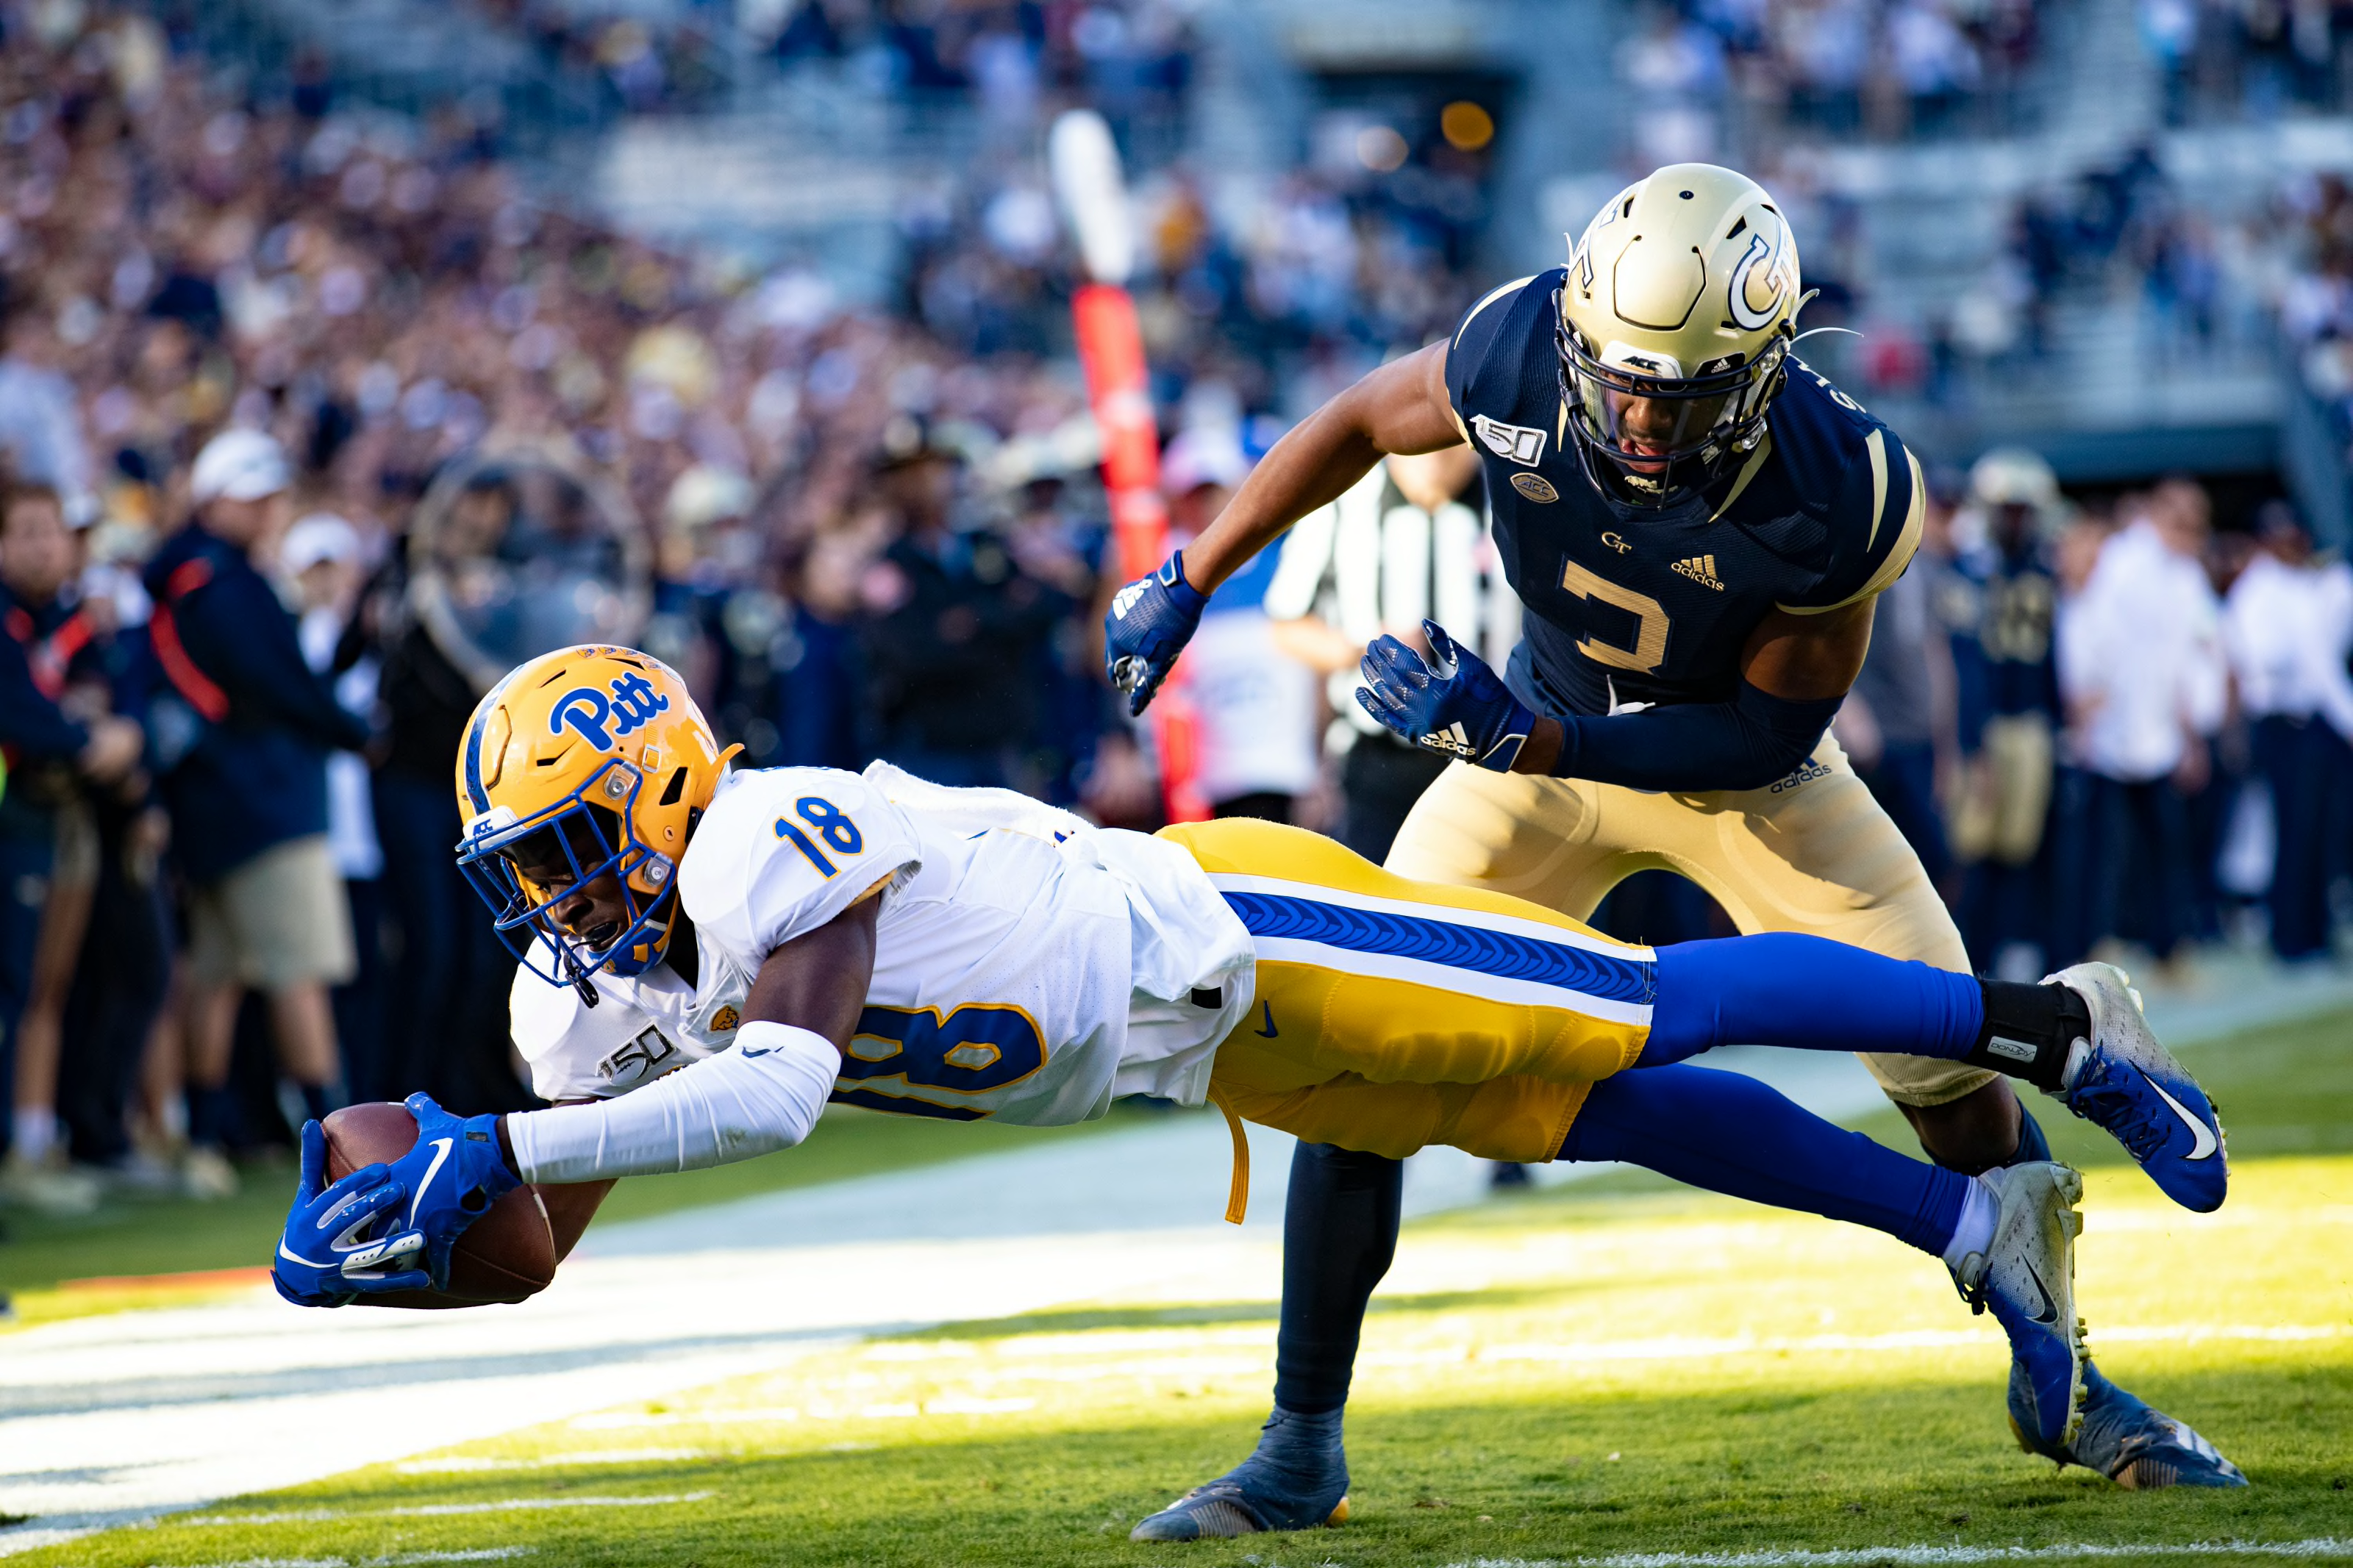 Pitt Football: Game-by-game predictions for 2020 season - Page 5